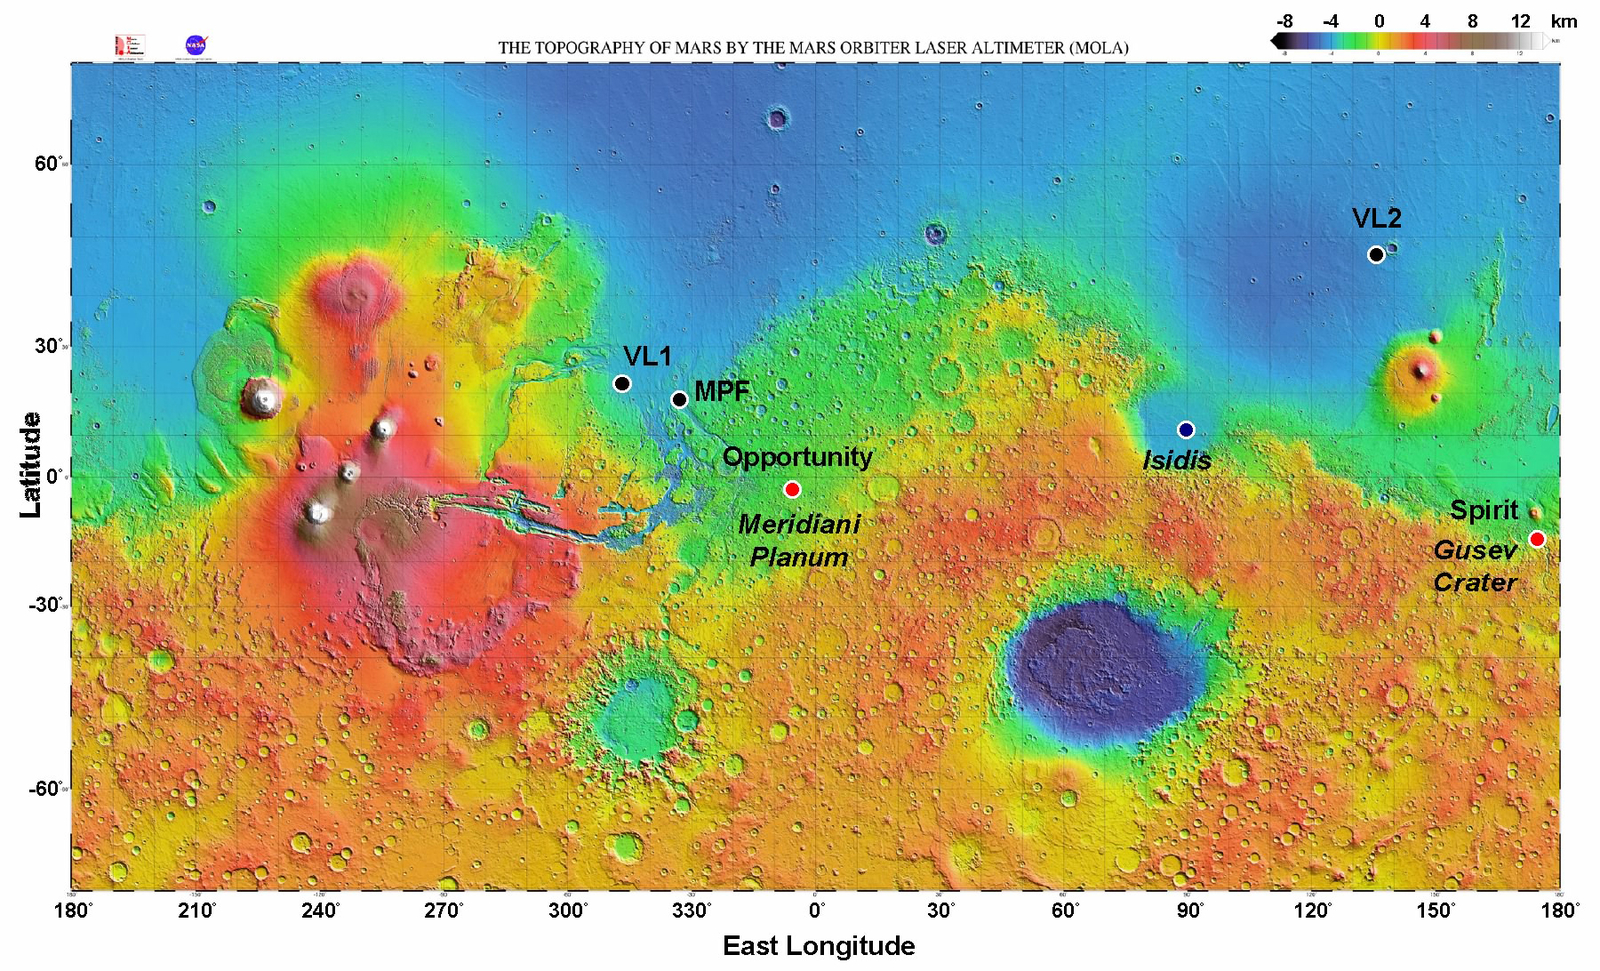 Locations of landers and rovers on Mars.